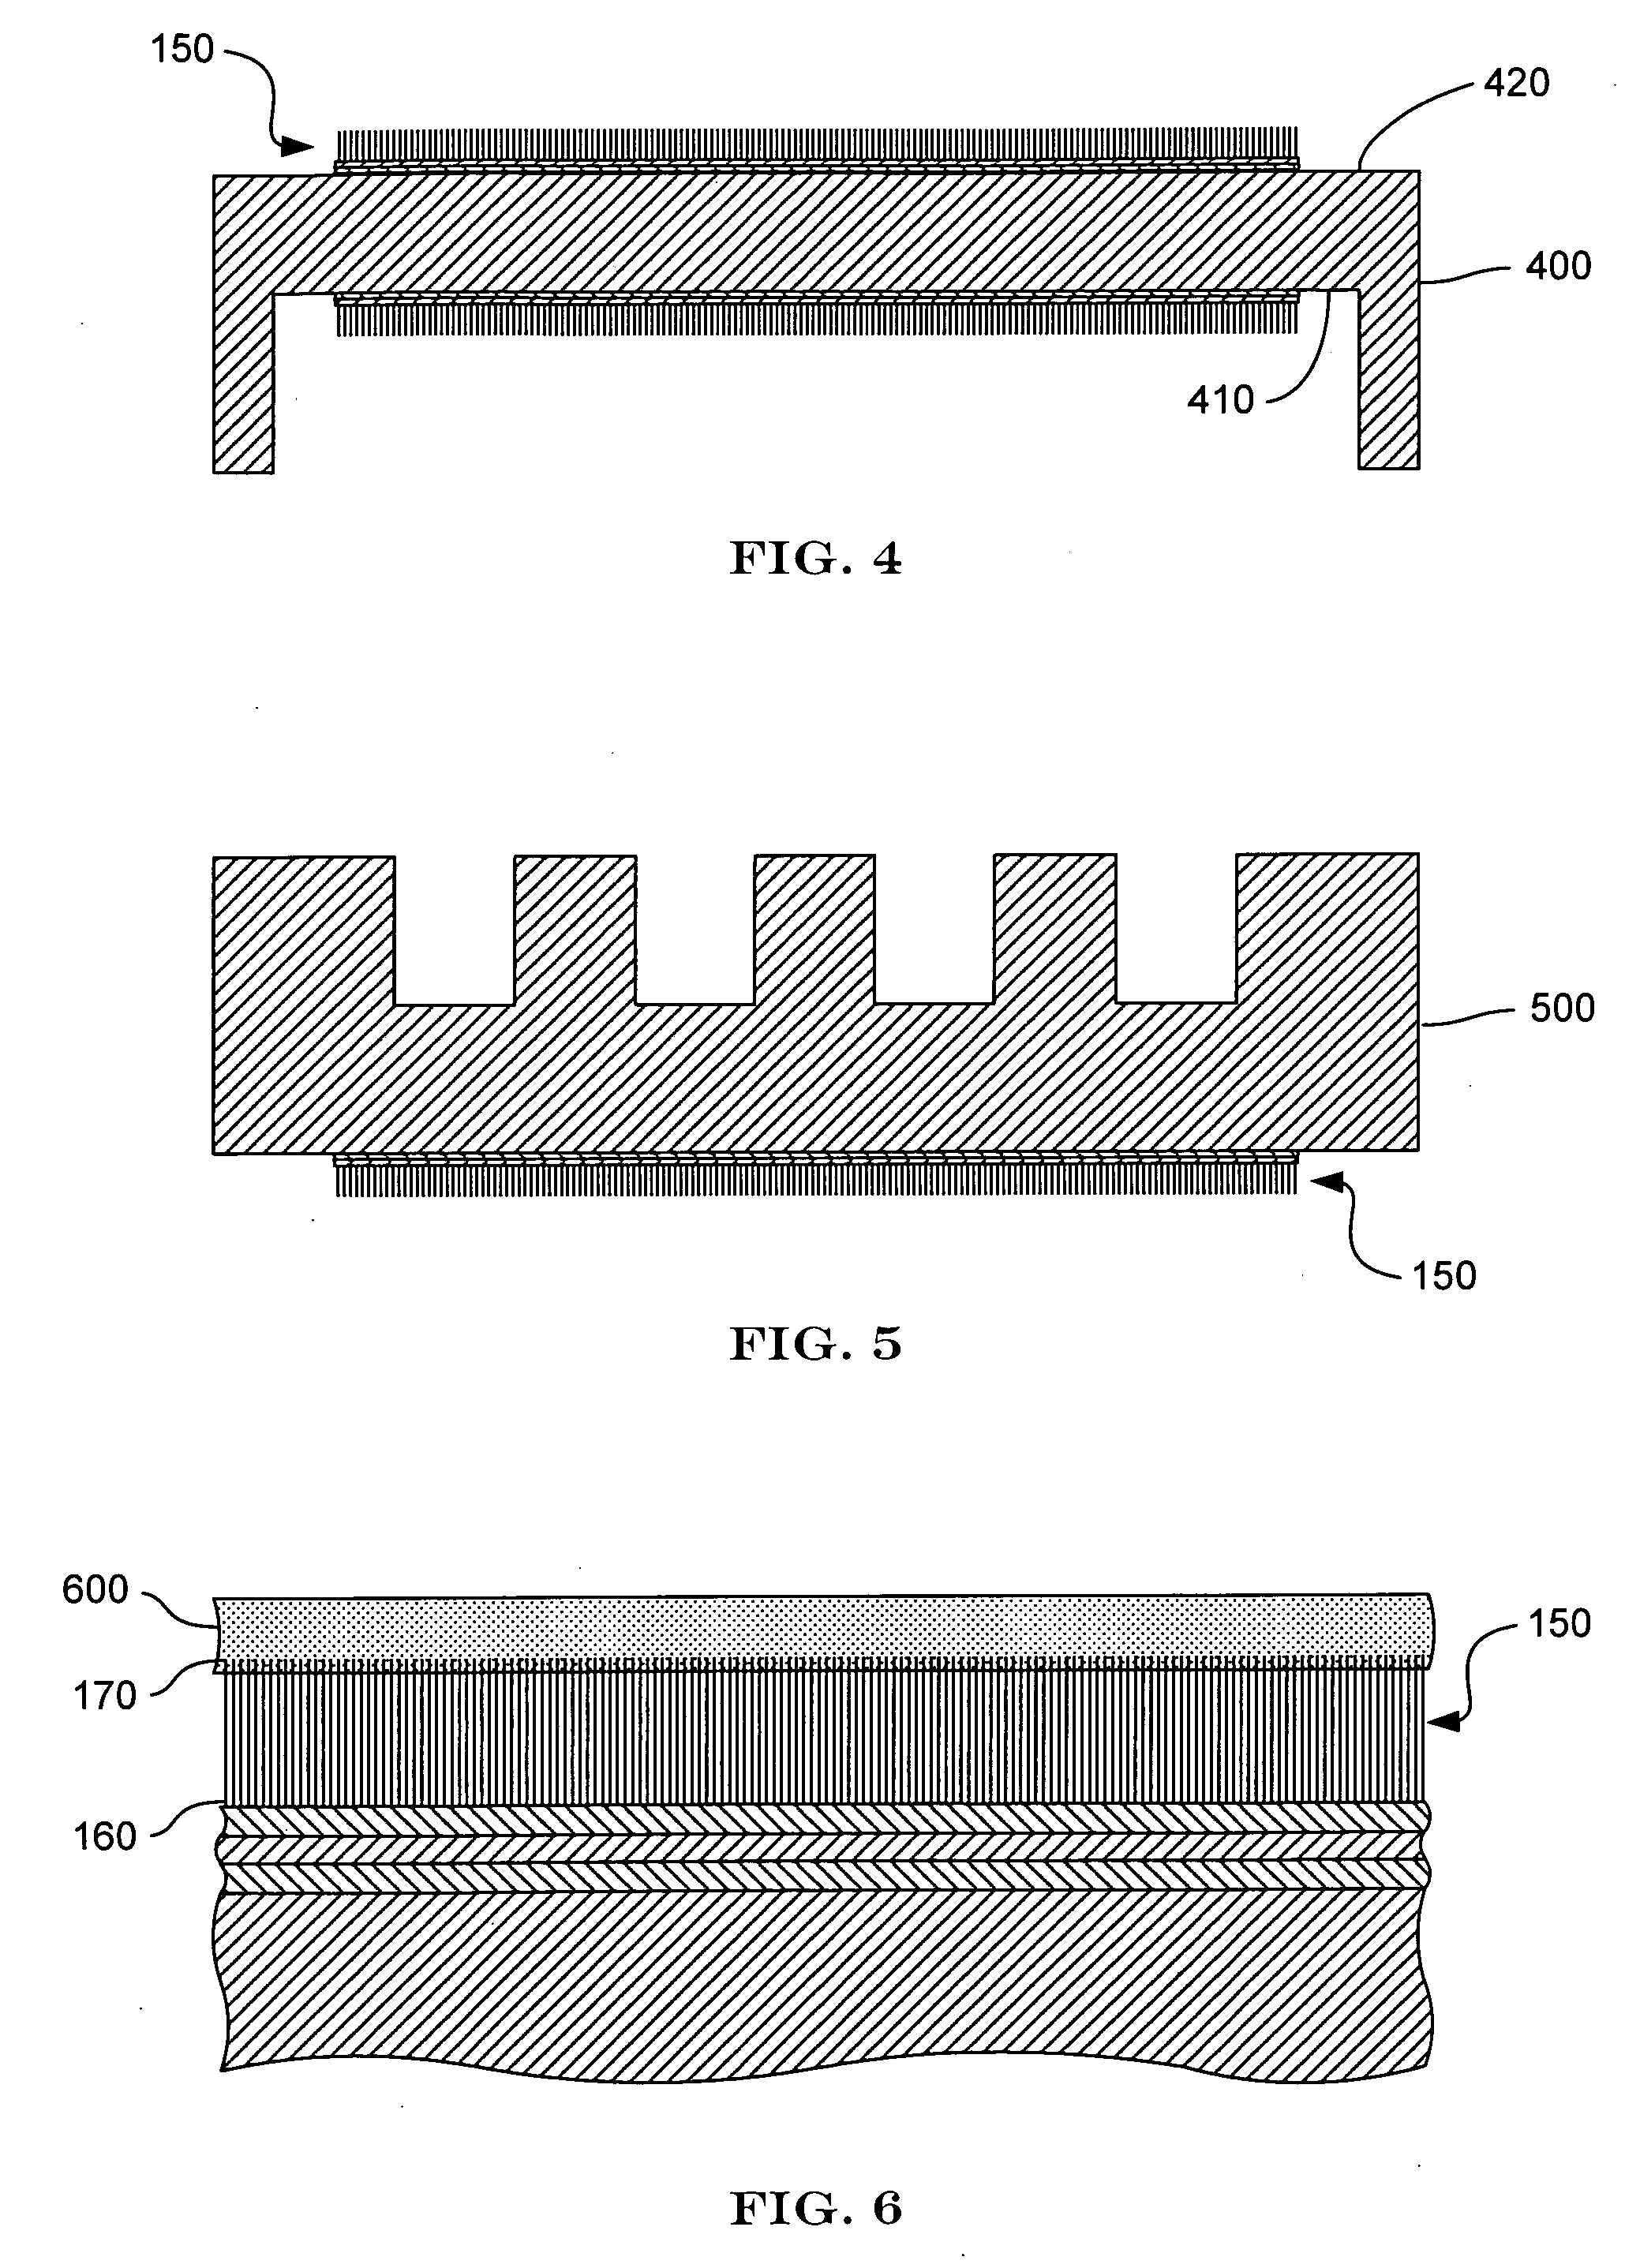 Methods for forming carbon nanotube thermal pads